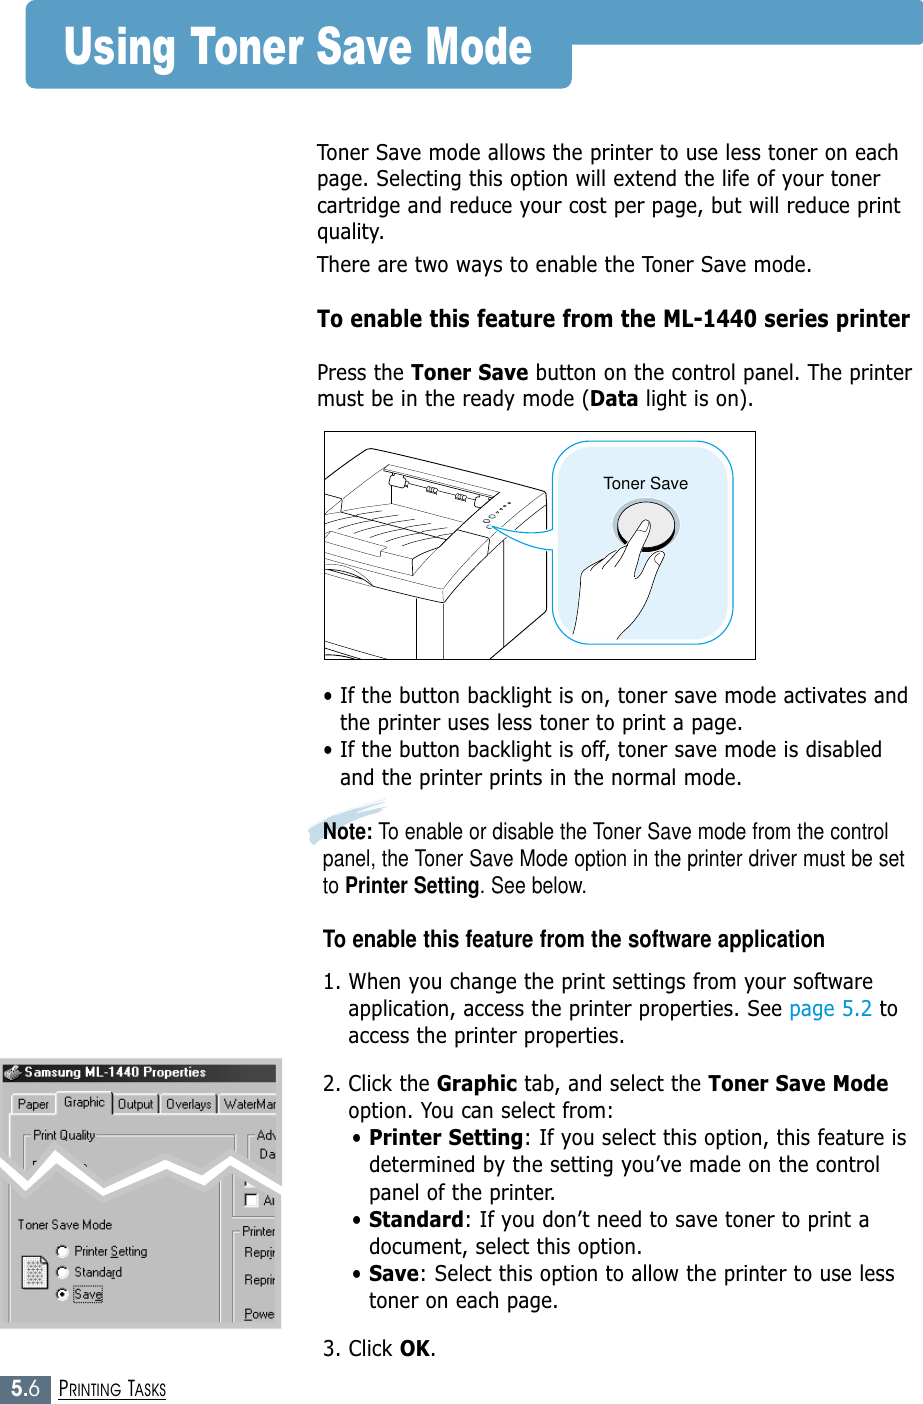 5.6PRINTING TASKSToner SaveUsing Toner Save ModeToner Save mode allows the printer to use less toner on eachpage. Selecting this option will extend the life of your tonercartridge and reduce your cost per page, but will reduce printquality.There are two ways to enable the Toner Save mode.To enable this feature from the ML-1440 series printerPress the Toner Save button on the control panel. The printermust be in the ready mode (Data light is on).• If the button backlight is on, toner save mode activates andthe printer uses less toner to print a page.• If the button backlight is off, toner save mode is disabledand the printer prints in the normal mode.Note: To enable or disable the Toner Save mode from the controlpanel, the Toner Save Mode option in the printer driver must be setto Printer Setting. See below.To enable this feature from the software application1. When you change the print settings from your softwareapplication, access the printer properties. See page 5.2 toaccess the printer properties.2. Click the Graphic tab, and select the Toner Save Modeoption. You can select from: • Printer Setting: If you select this option, this feature isdetermined by the setting you’ve made on the controlpanel of the printer.• Standard: If you don’t need to save toner to print adocument, select this option.• Save: Select this option to allow the printer to use lesstoner on each page.3. Click OK.